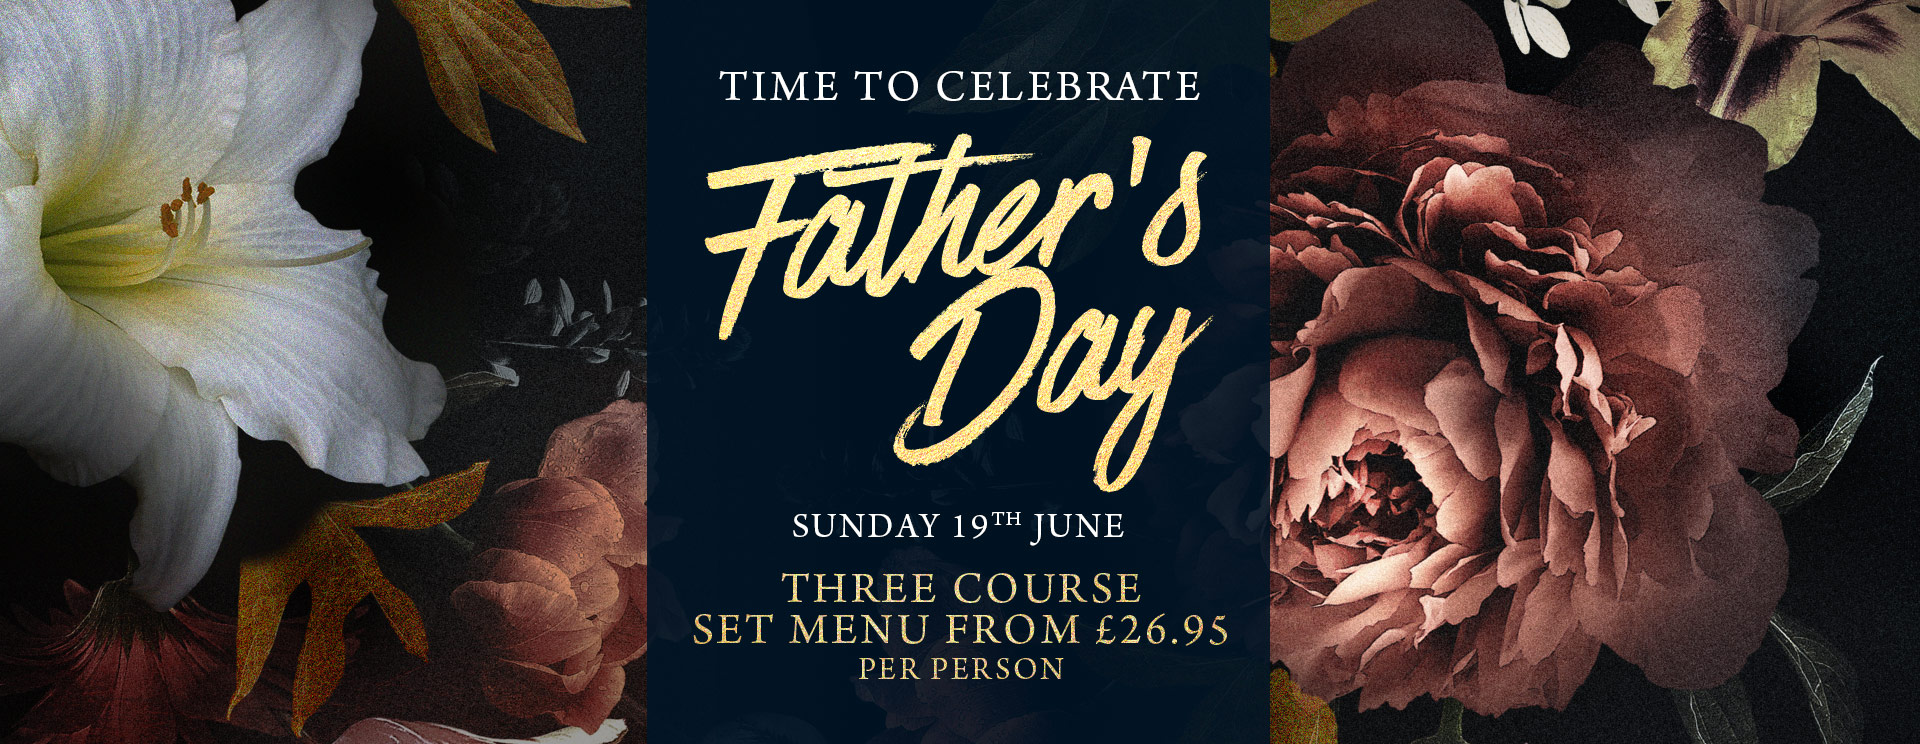 Fathers Day at The Plough & Harrow